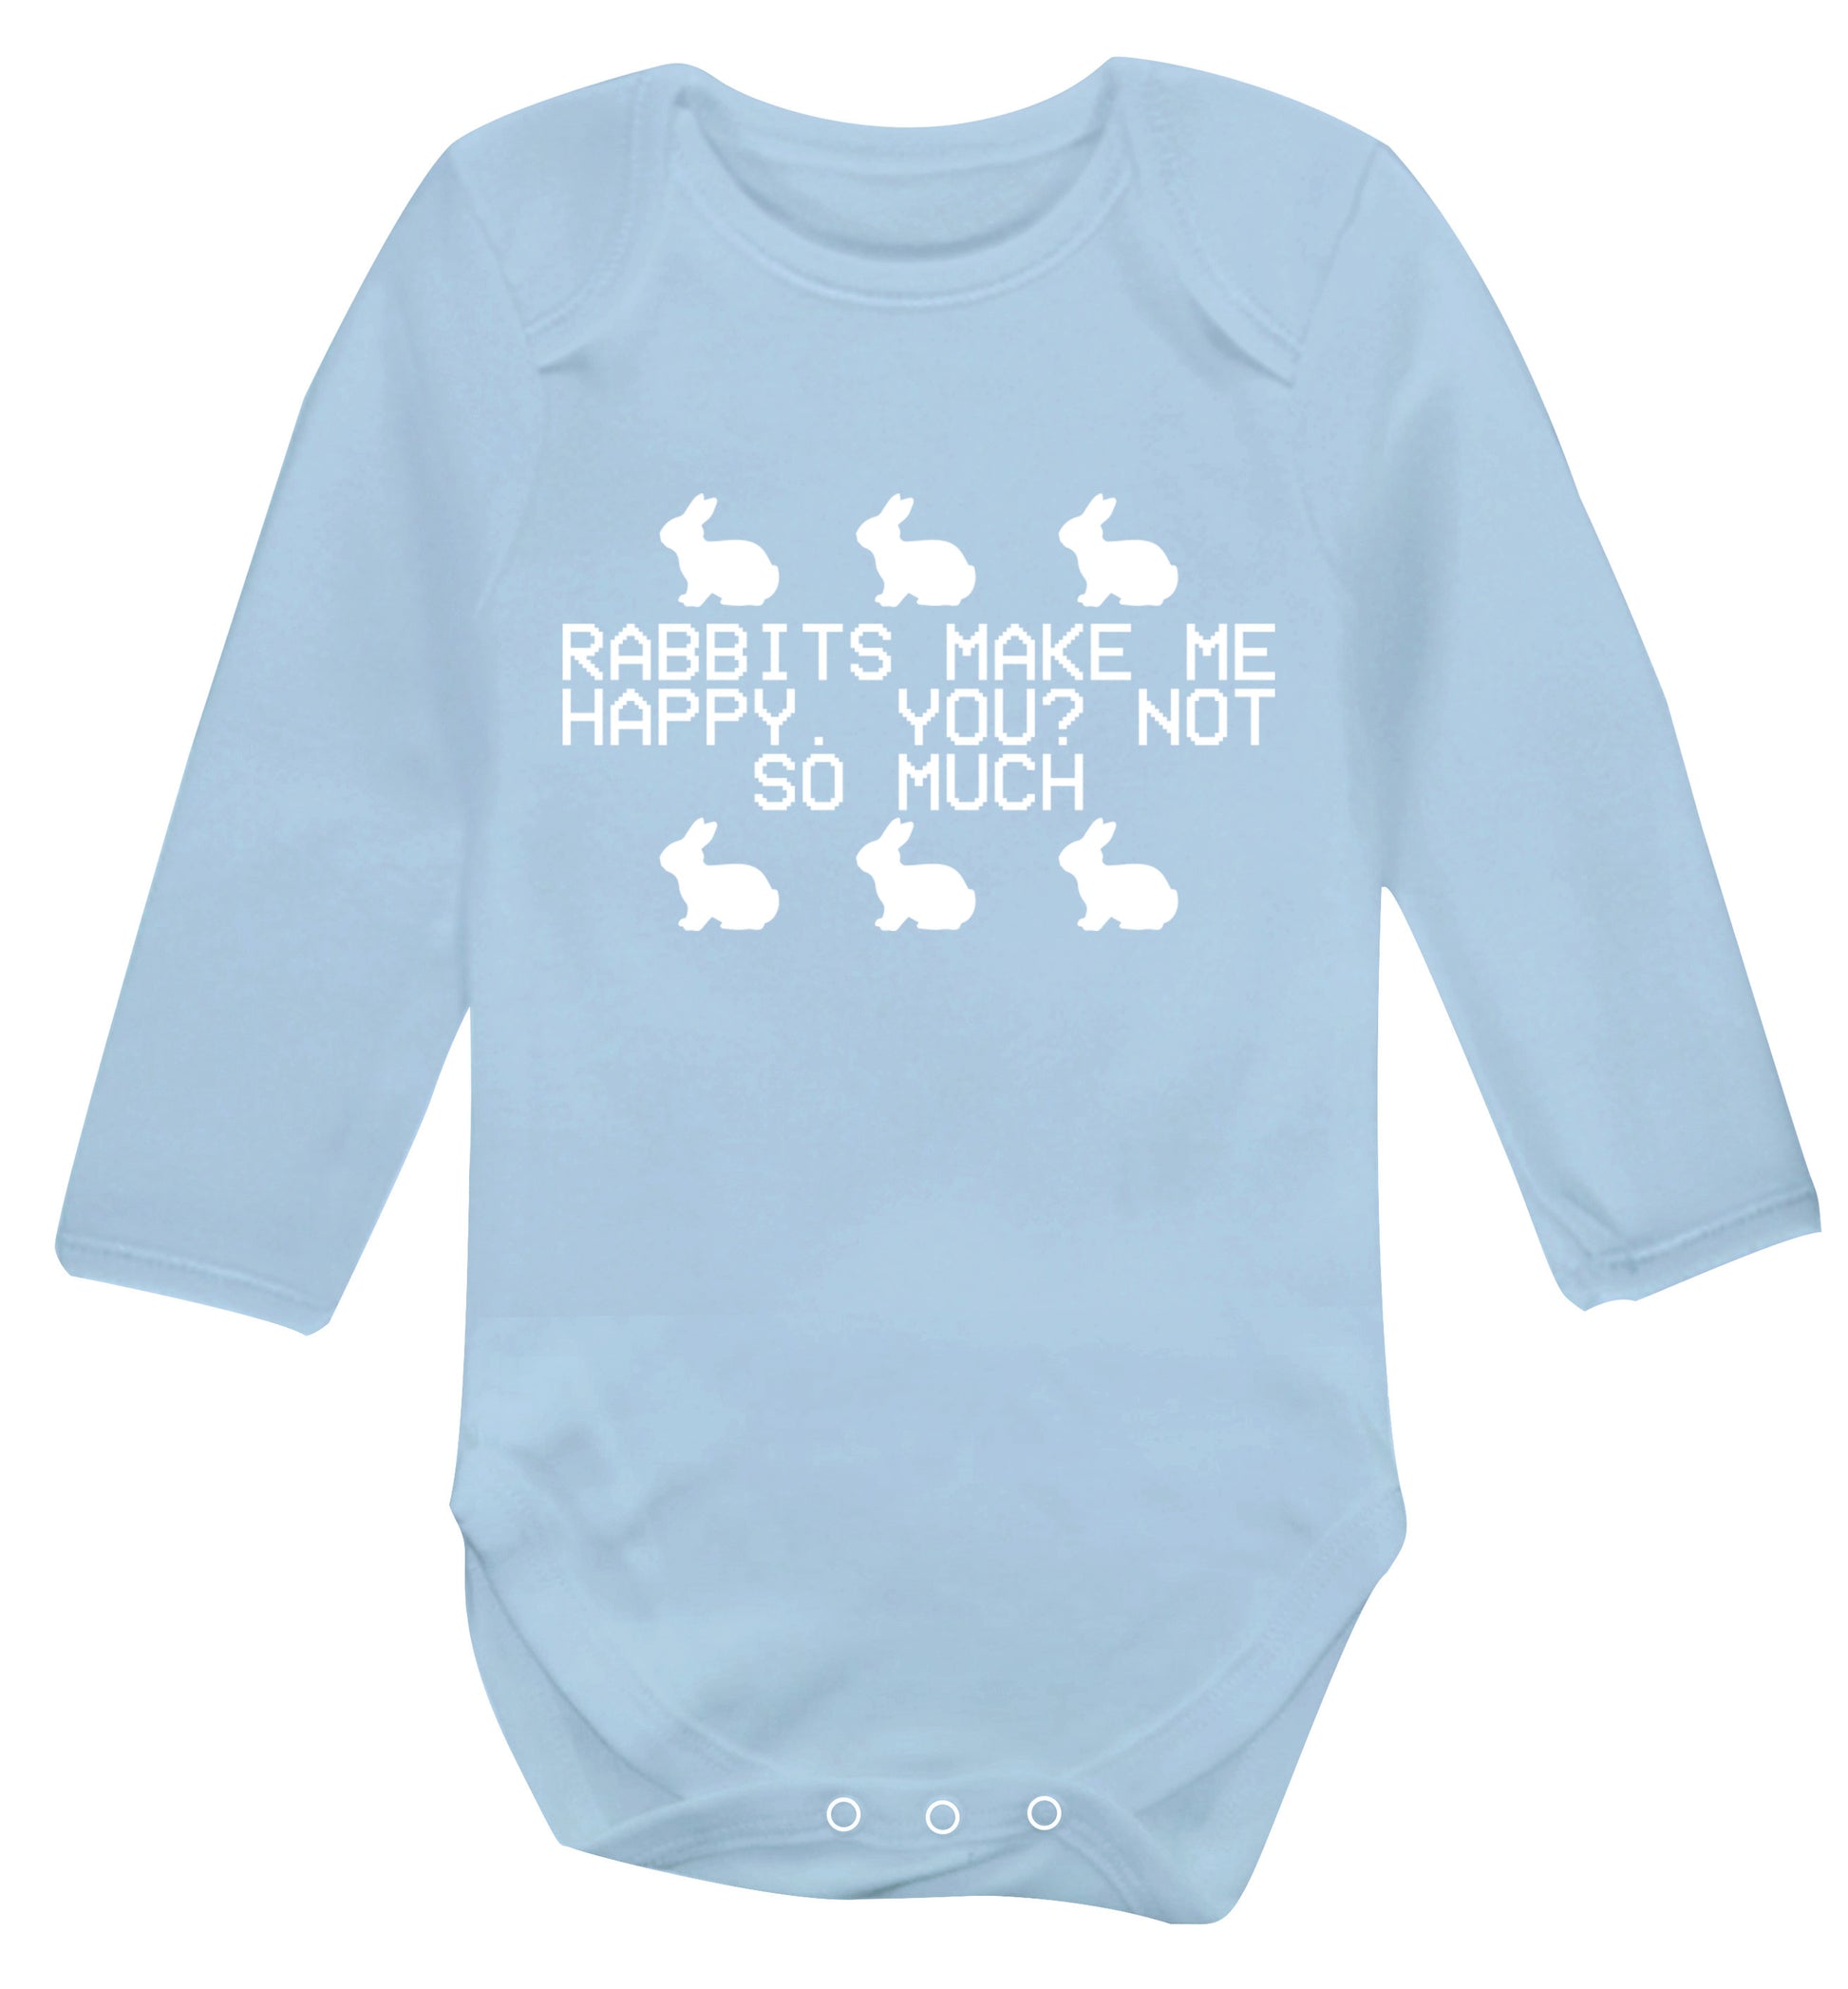 Rabbits make me happy, you not so much Baby Vest long sleeved pale blue 6-12 months